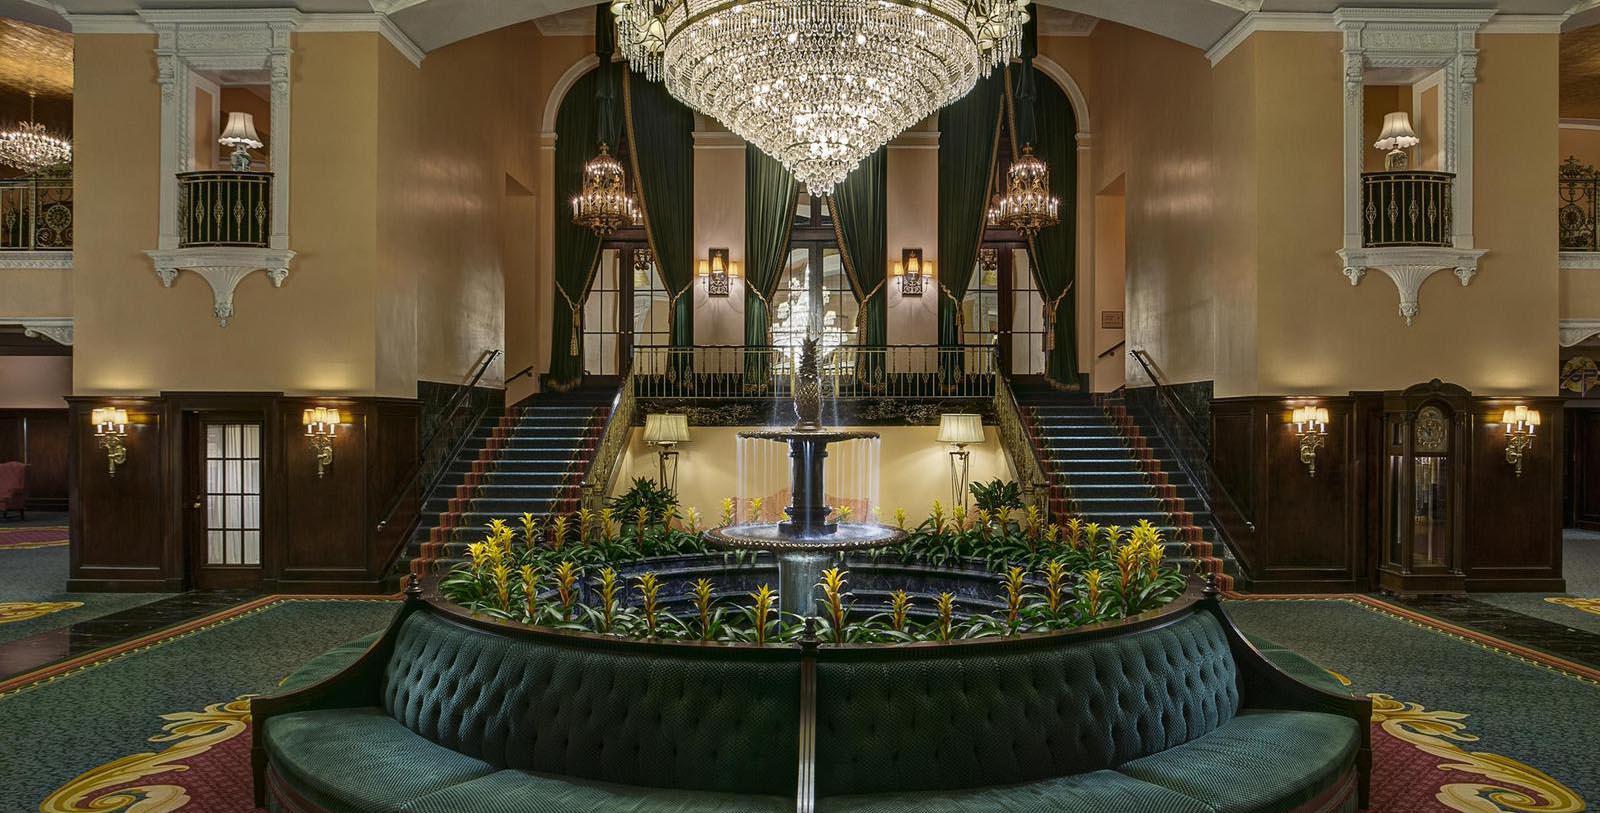 Image of Lobby at Amway Grand Plaza Hotel, 1913, 1913, Member of Historic Hotels of America, in Grand Rapids, Michigan, Special Offers, Discounted Rates, Families, Romantic Escape, Honeymoons, Anniversaries, Reunions